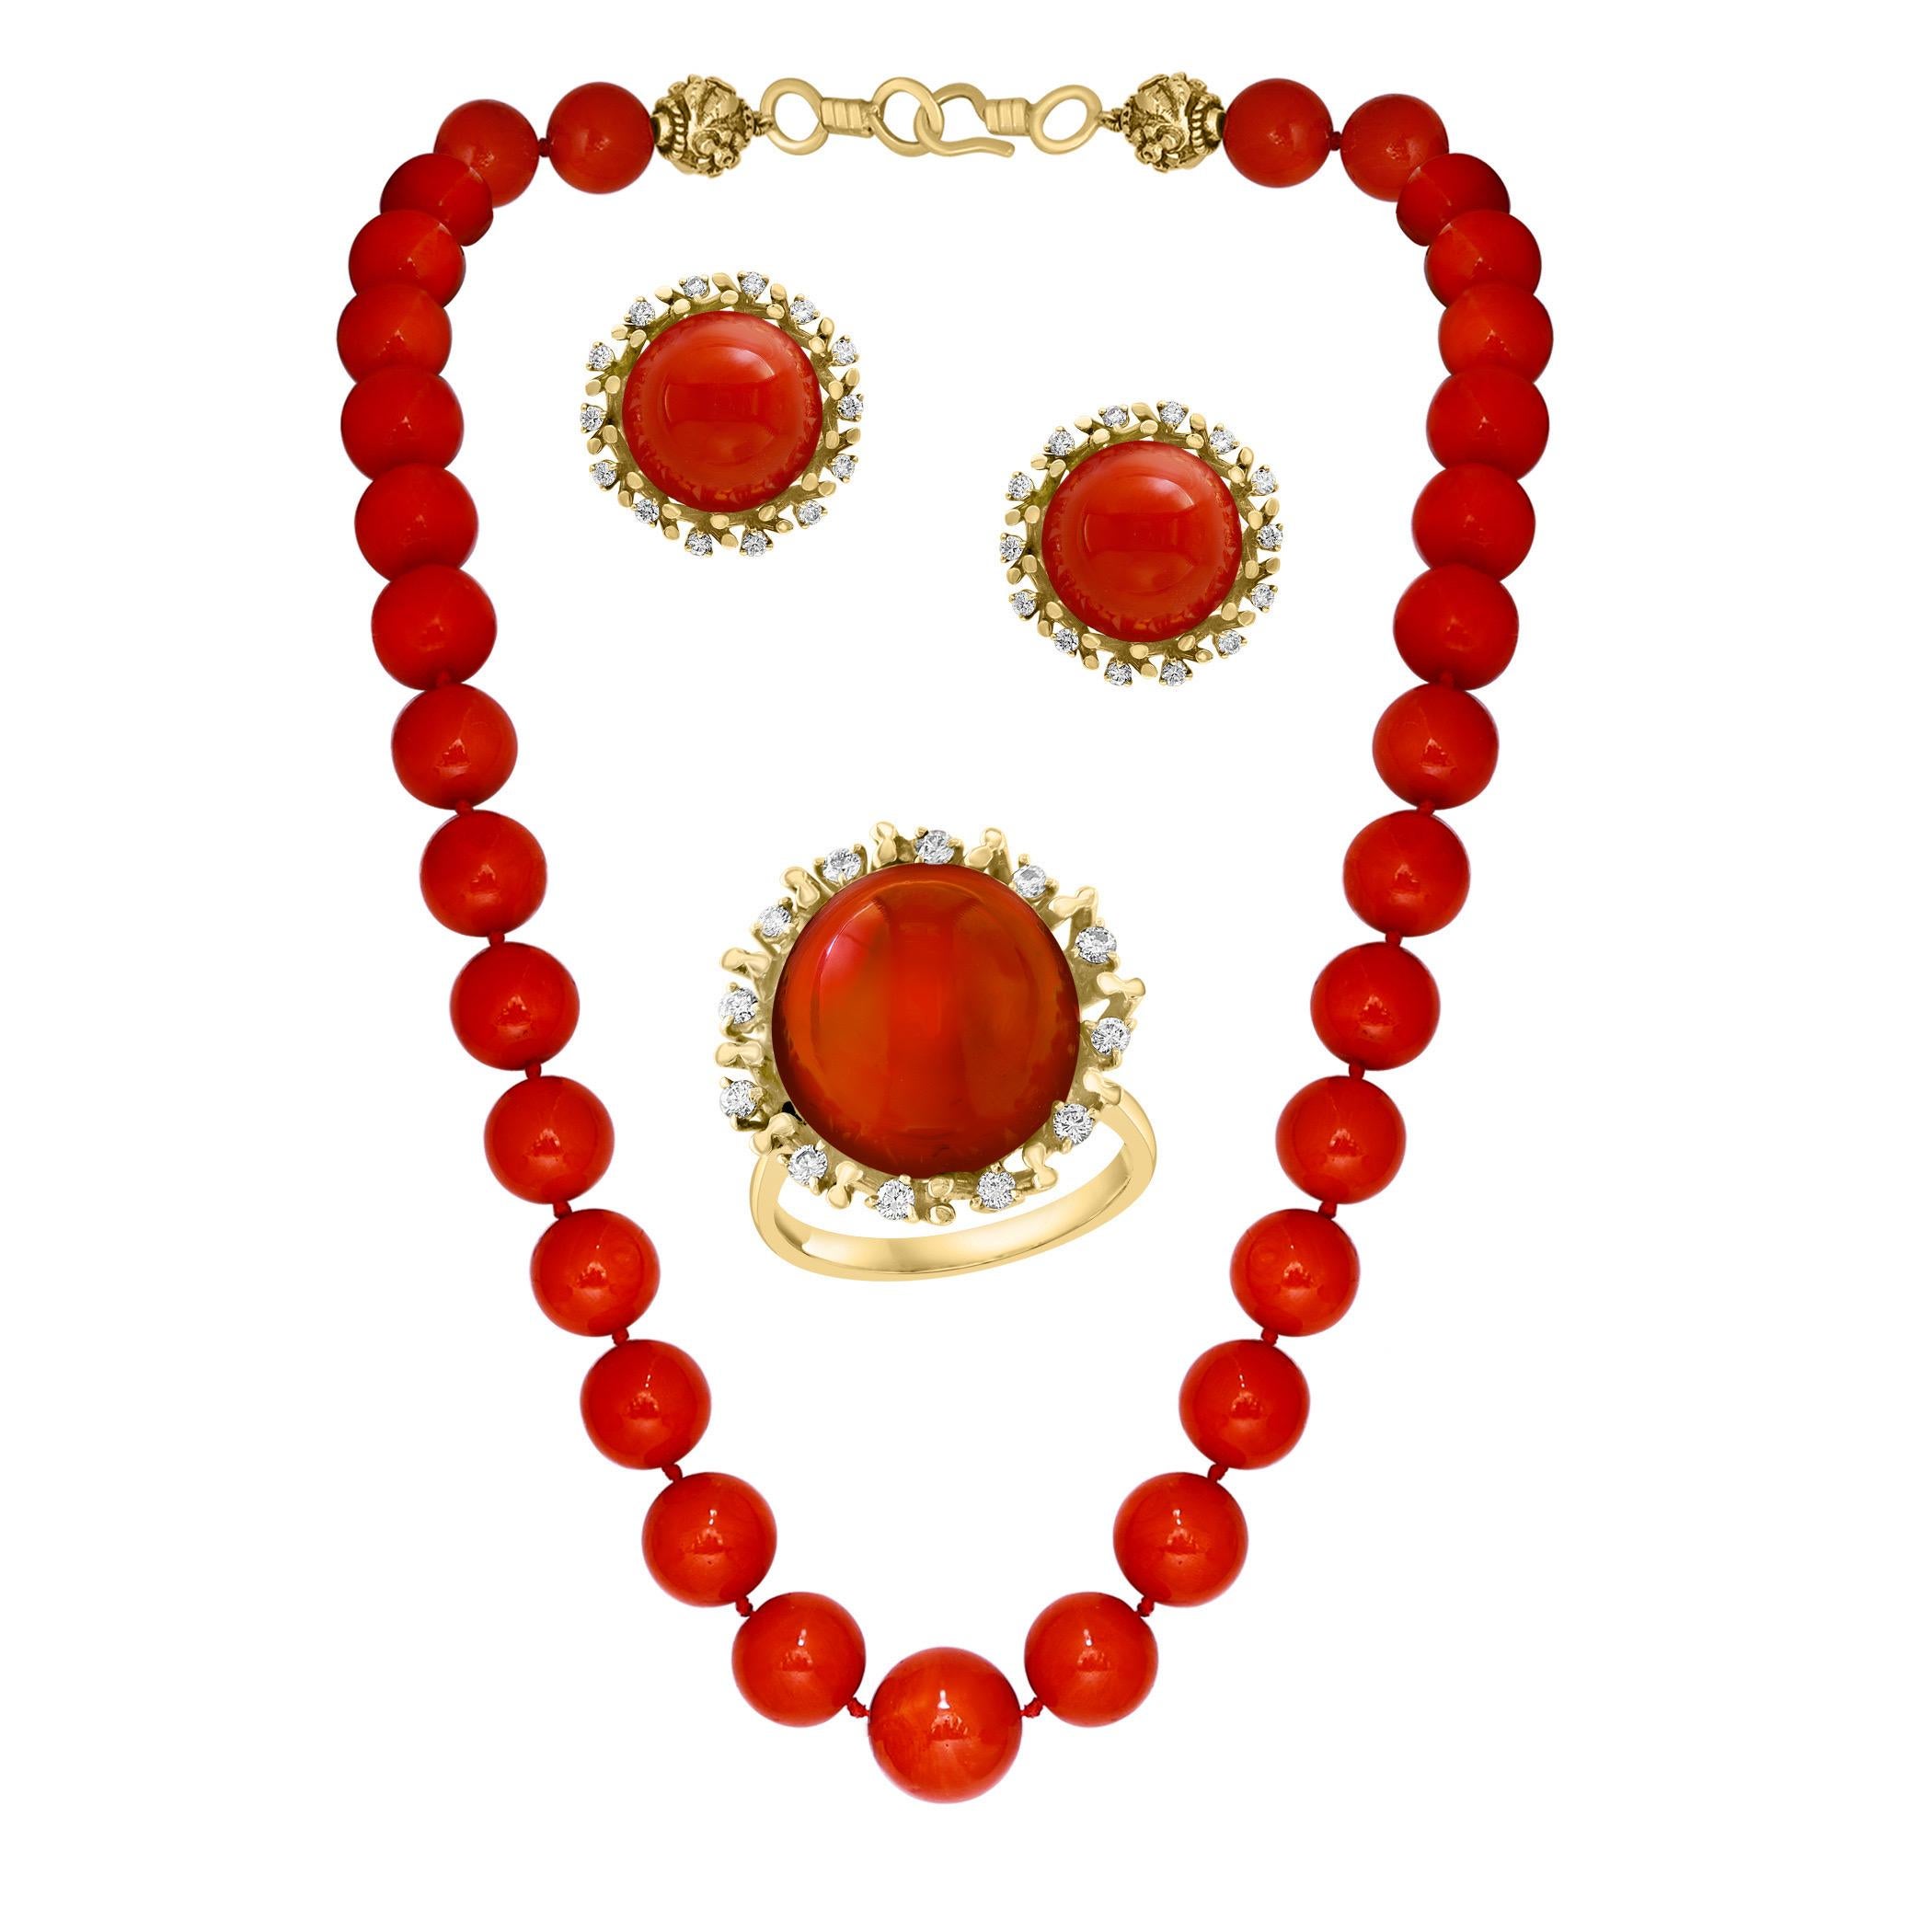 Women's GIA Vintage Natural Red Coral  Necklace 14-18MM, 18 KY Gold, Estate Fine Jewelry